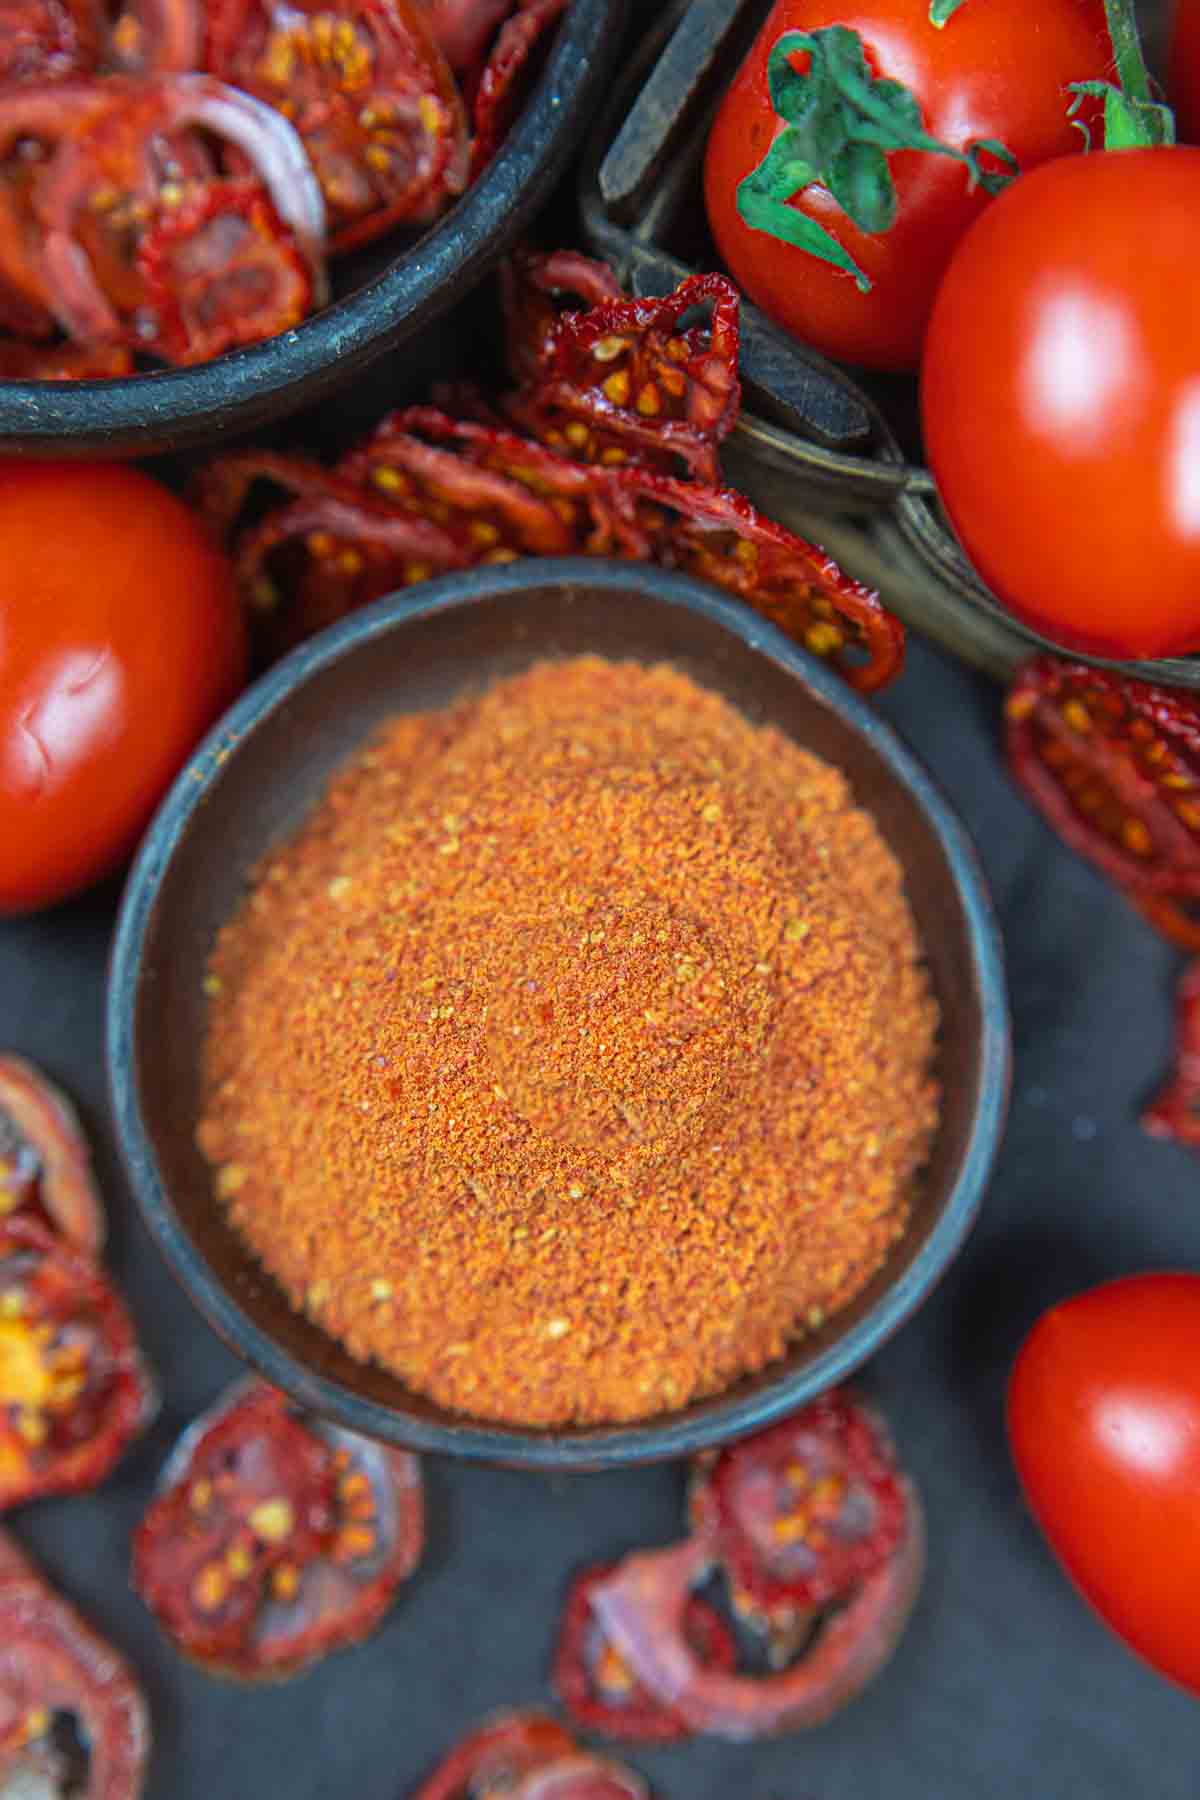 A close-up of a bowl of tomato powder surrounded by fresh tomatoes on a dark surface.